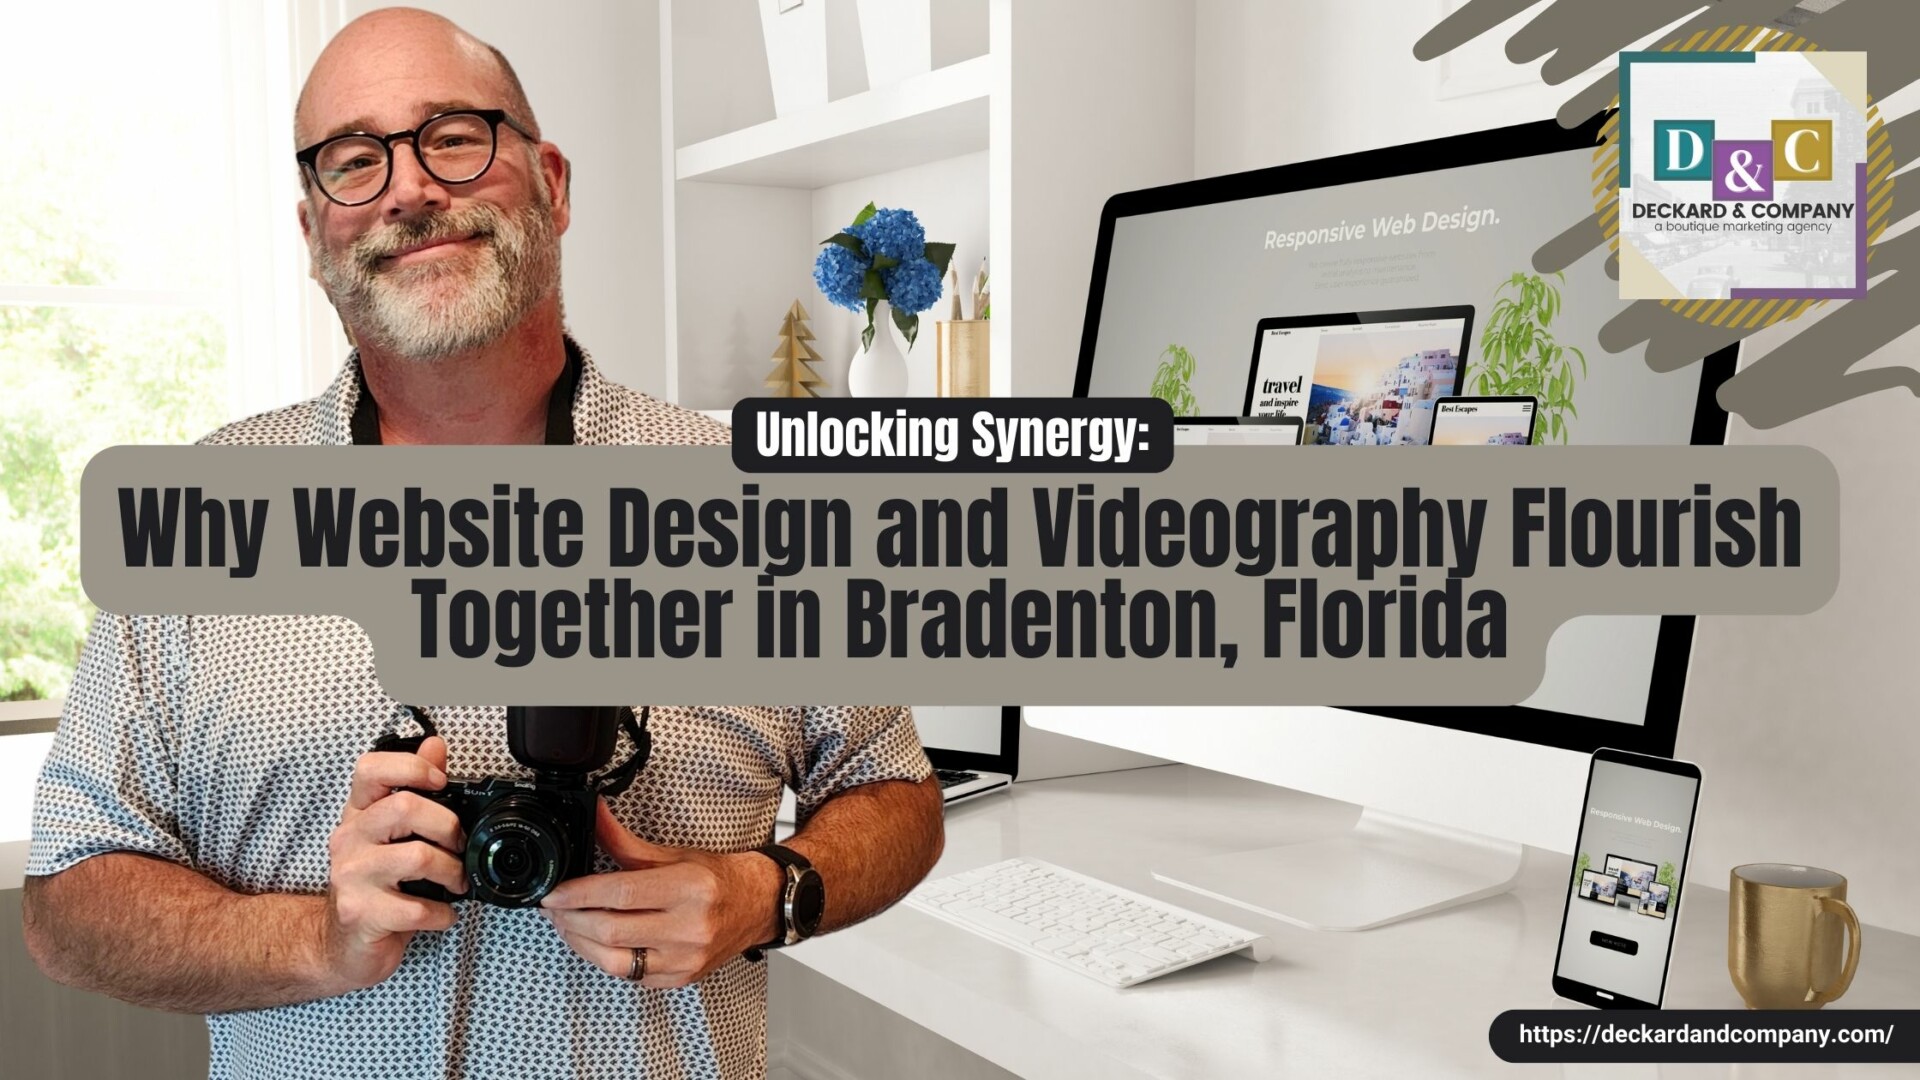 Unlocking Synergy Why Website Design and Videography Flourish Together in Bradenton, Florida with Deckard & Company, a Boutique Marketing Agency